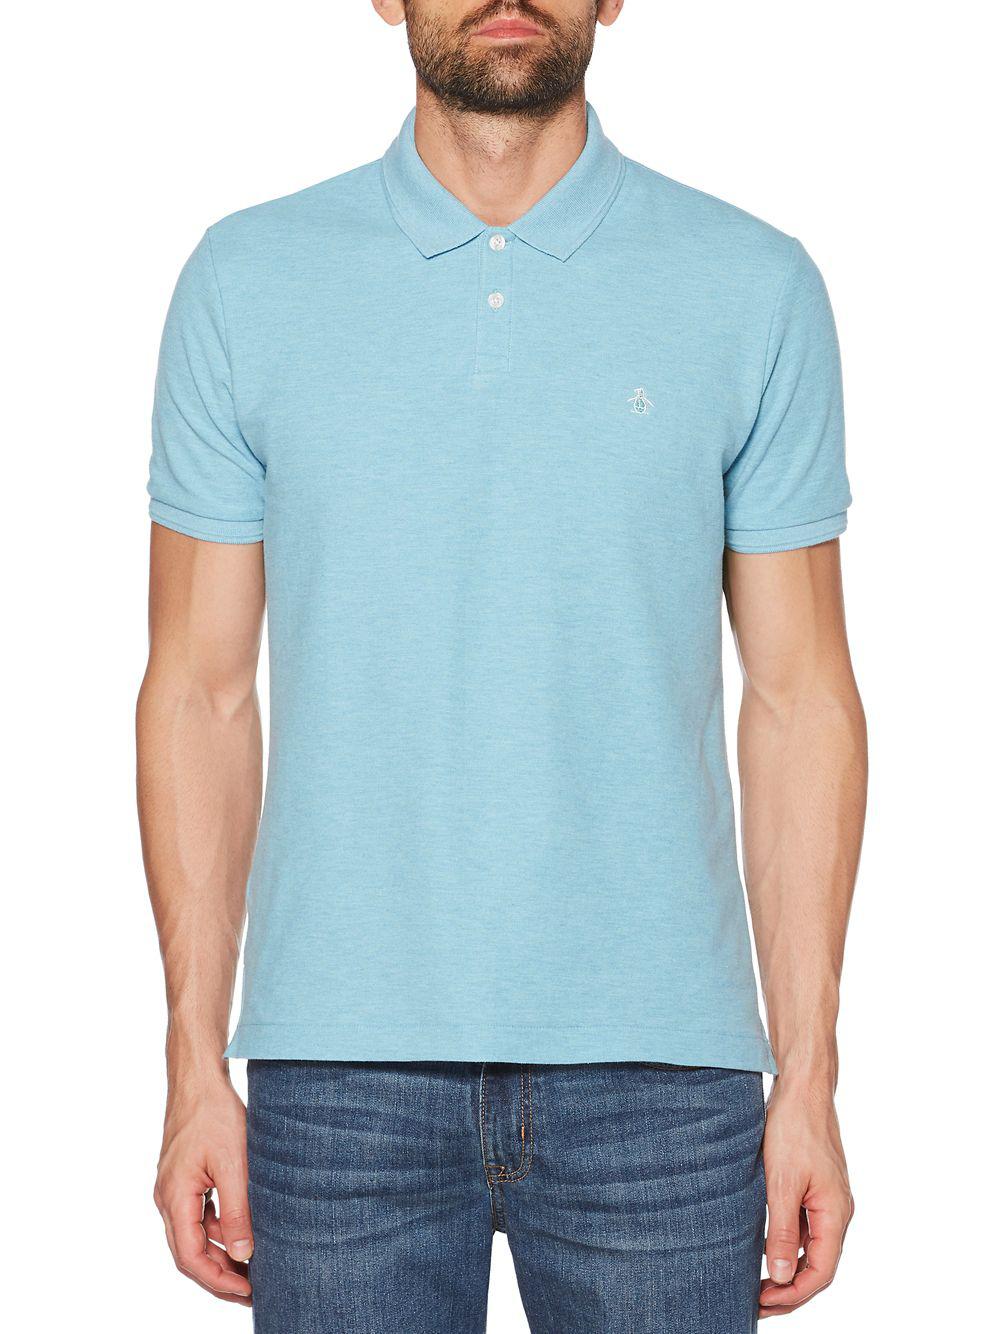 Original Penguin Daddy-o Classic Fit Polo Shirt in Blue for Men - Lyst